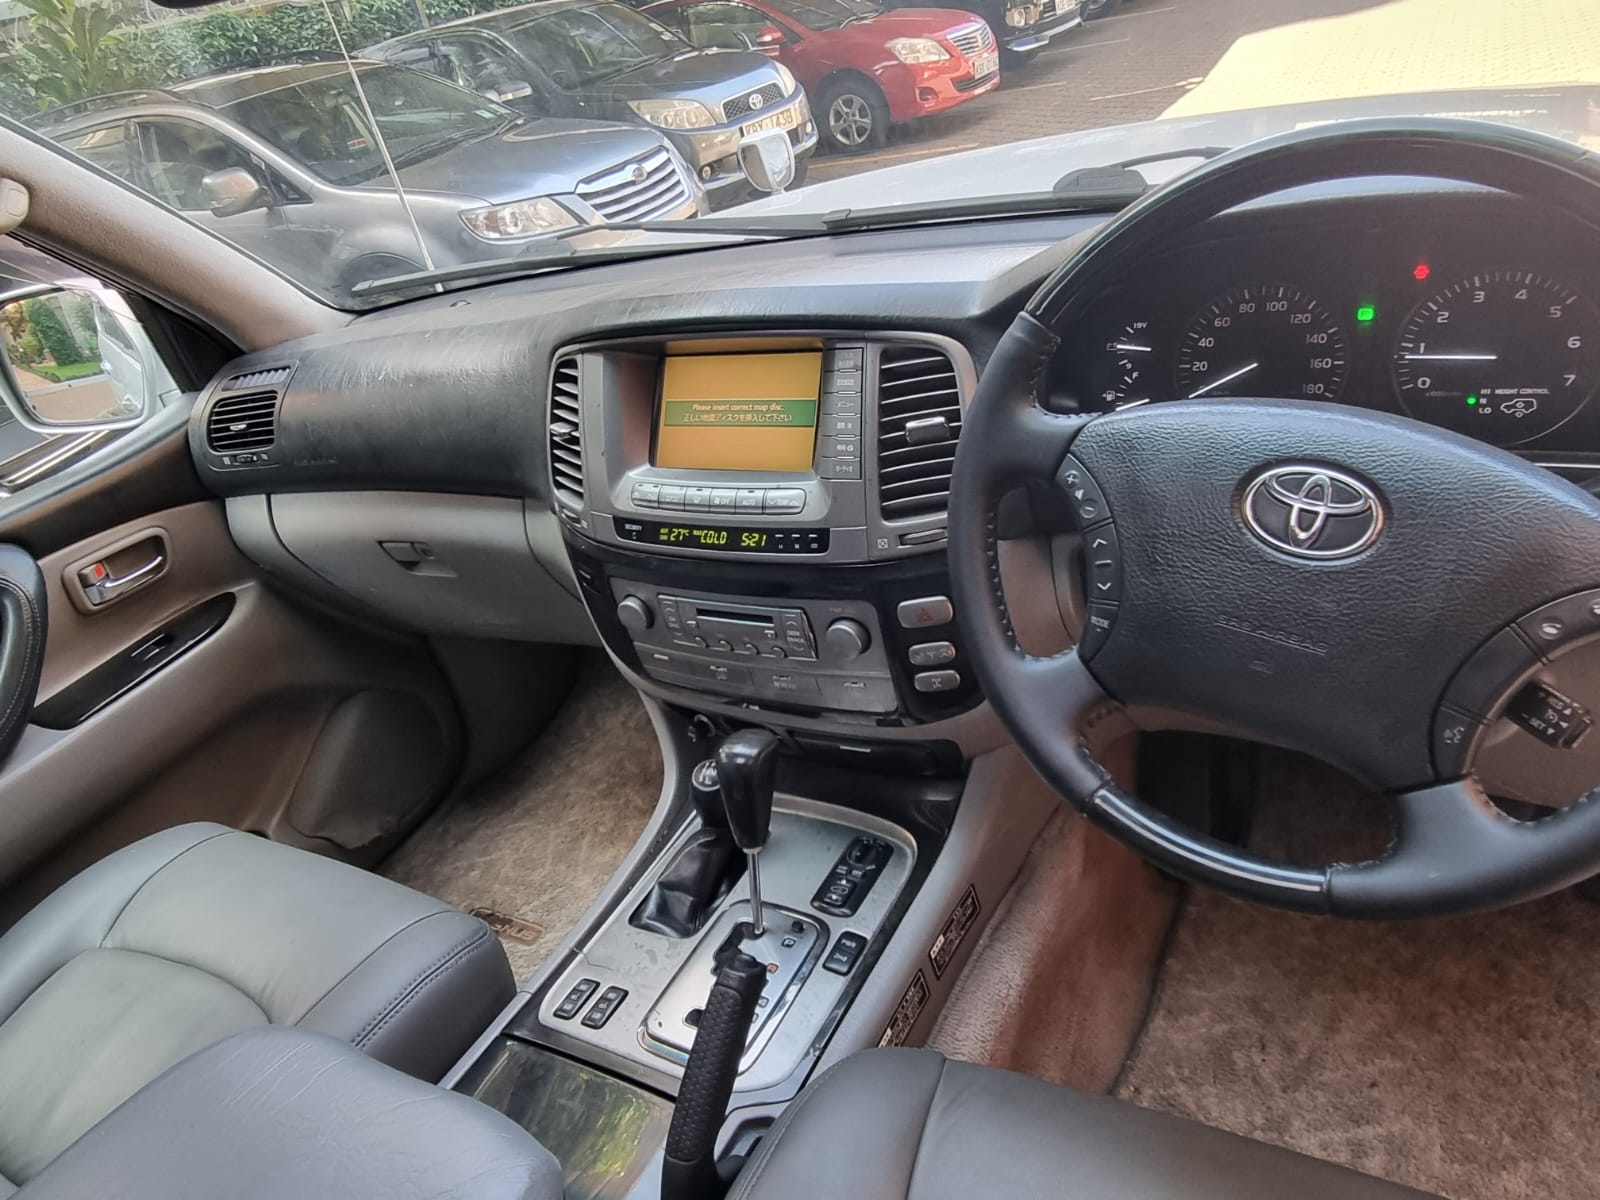 Toyota Land cruiser VX CYGNUS 2007 SUNROOF ASIAN OWNER 100 SERIES TRADE IN OK EXCLUSIVE